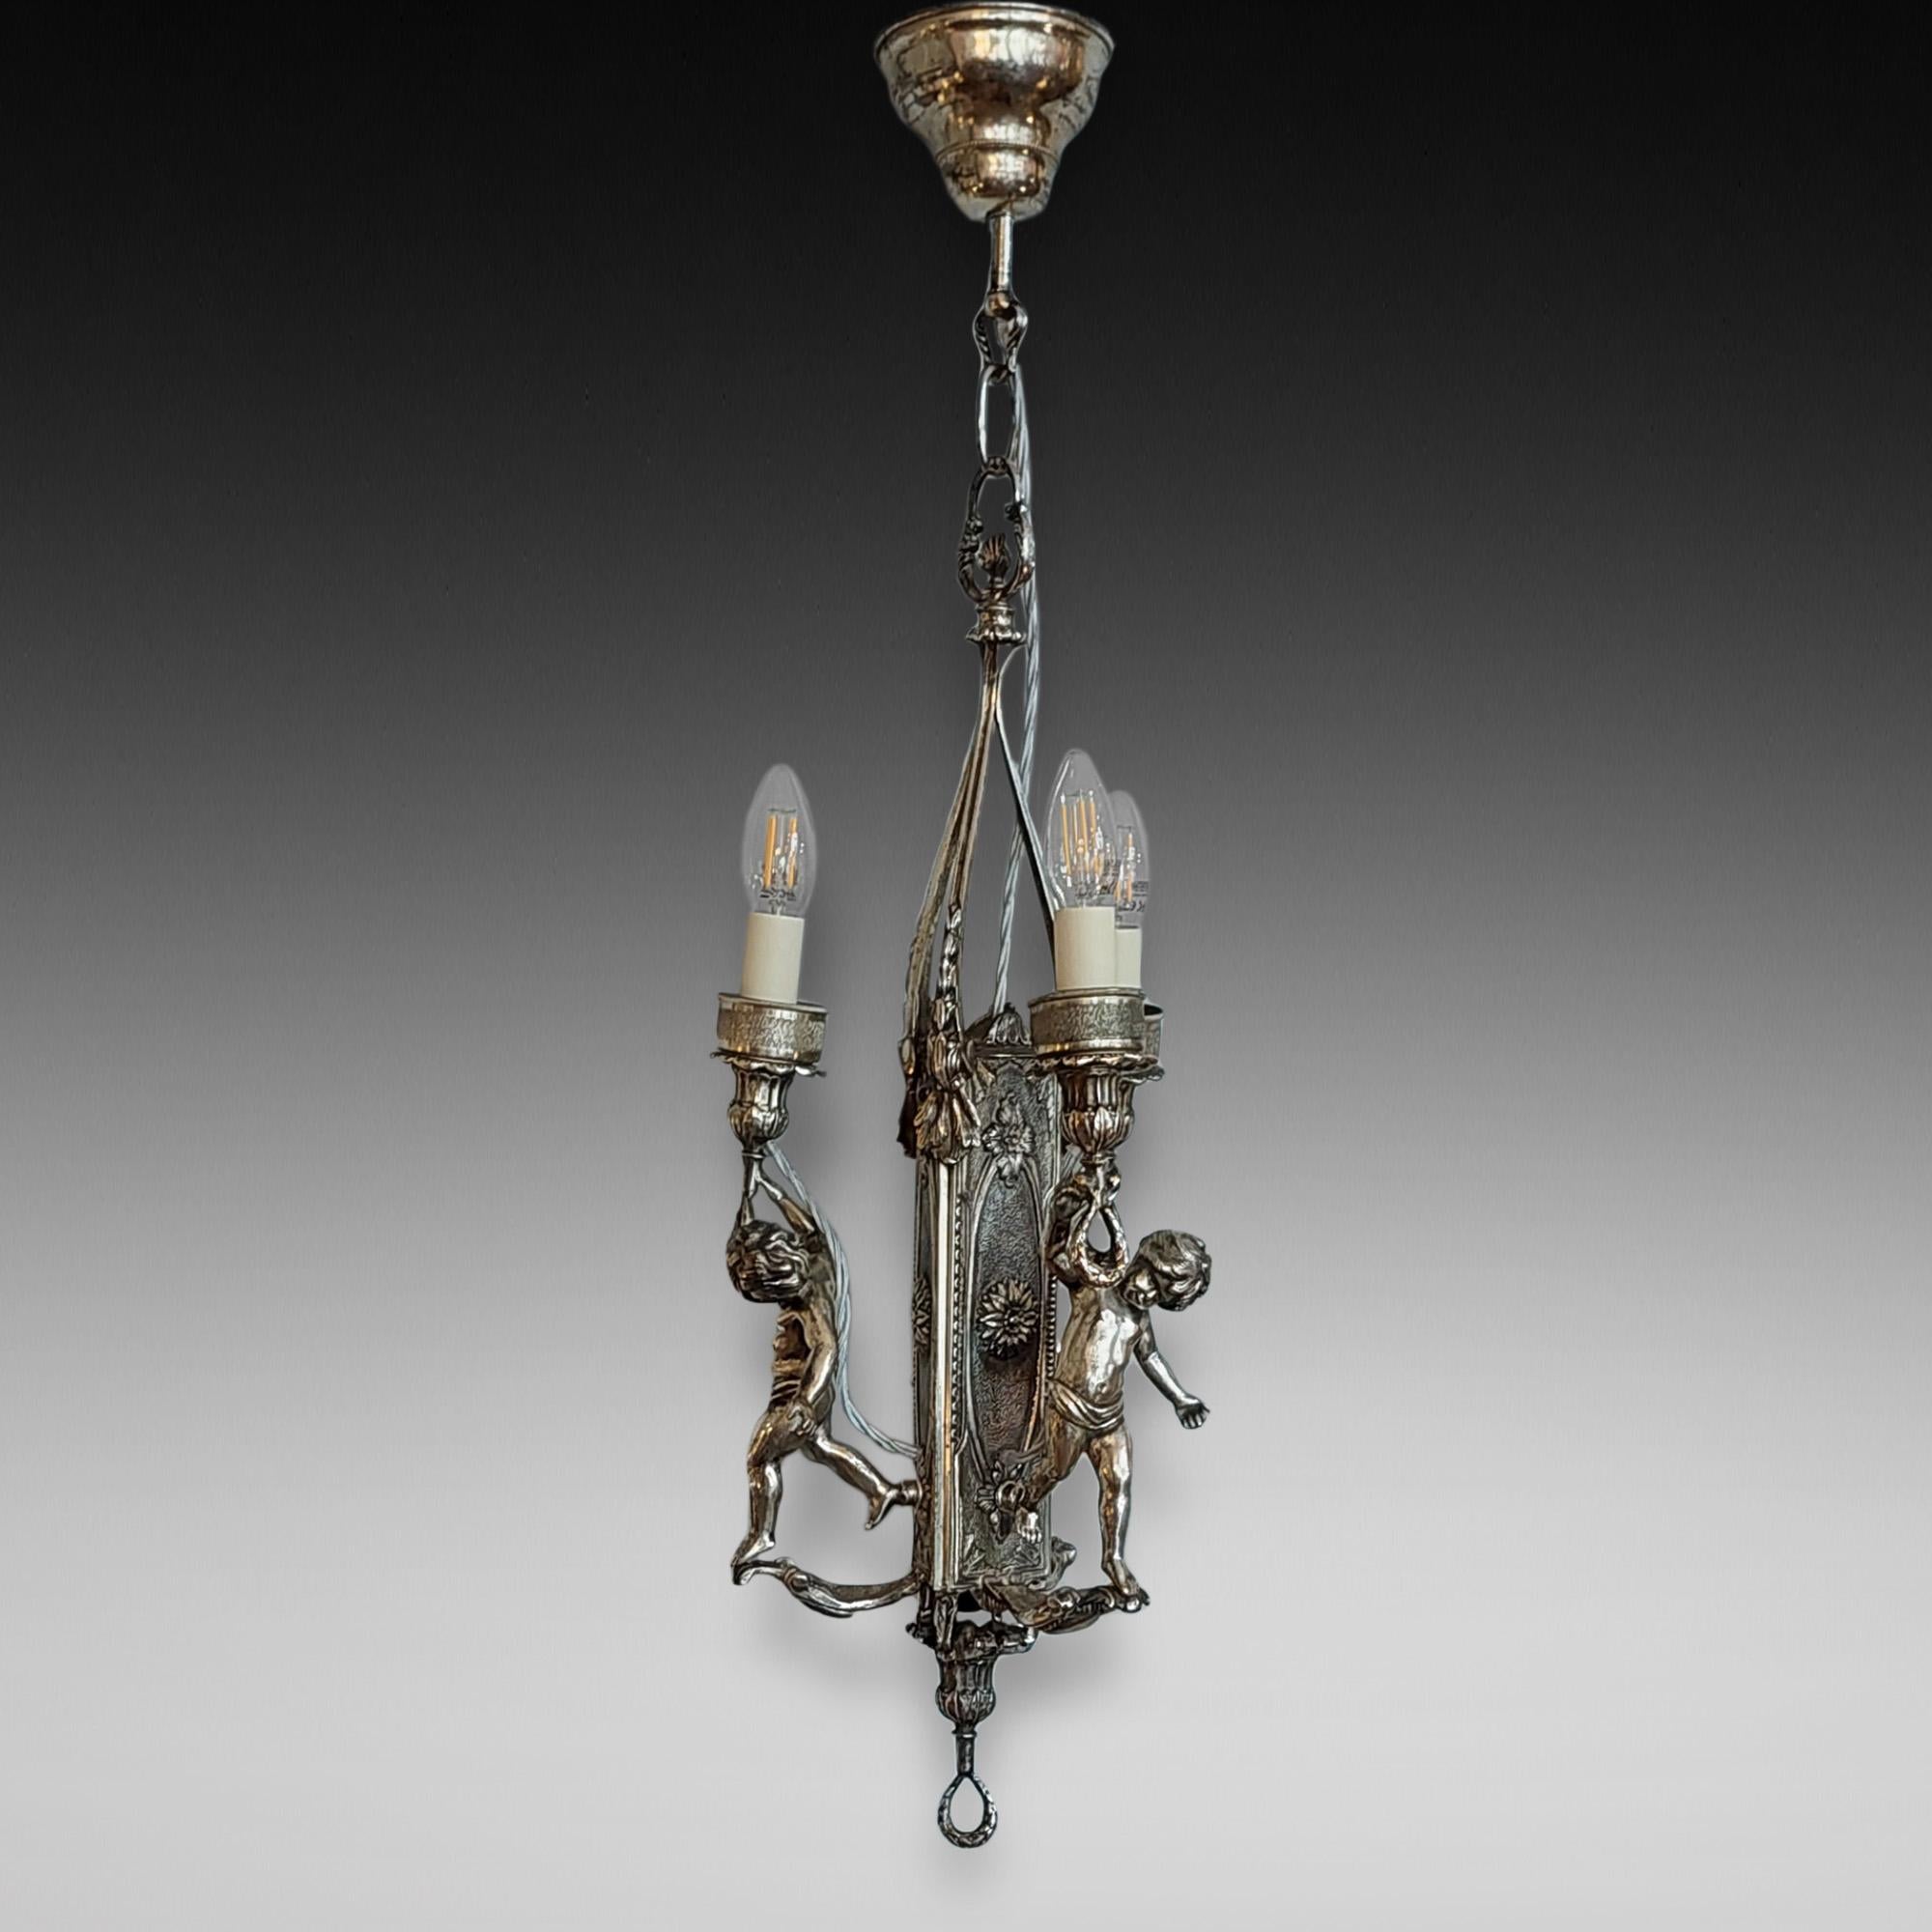 Mid 19thC Silver Plated Ceiling Candle Light Fitting of Three Cherubs Holding Urn Shaped Torches with Adam Style Rosettes - converted to electric - 9